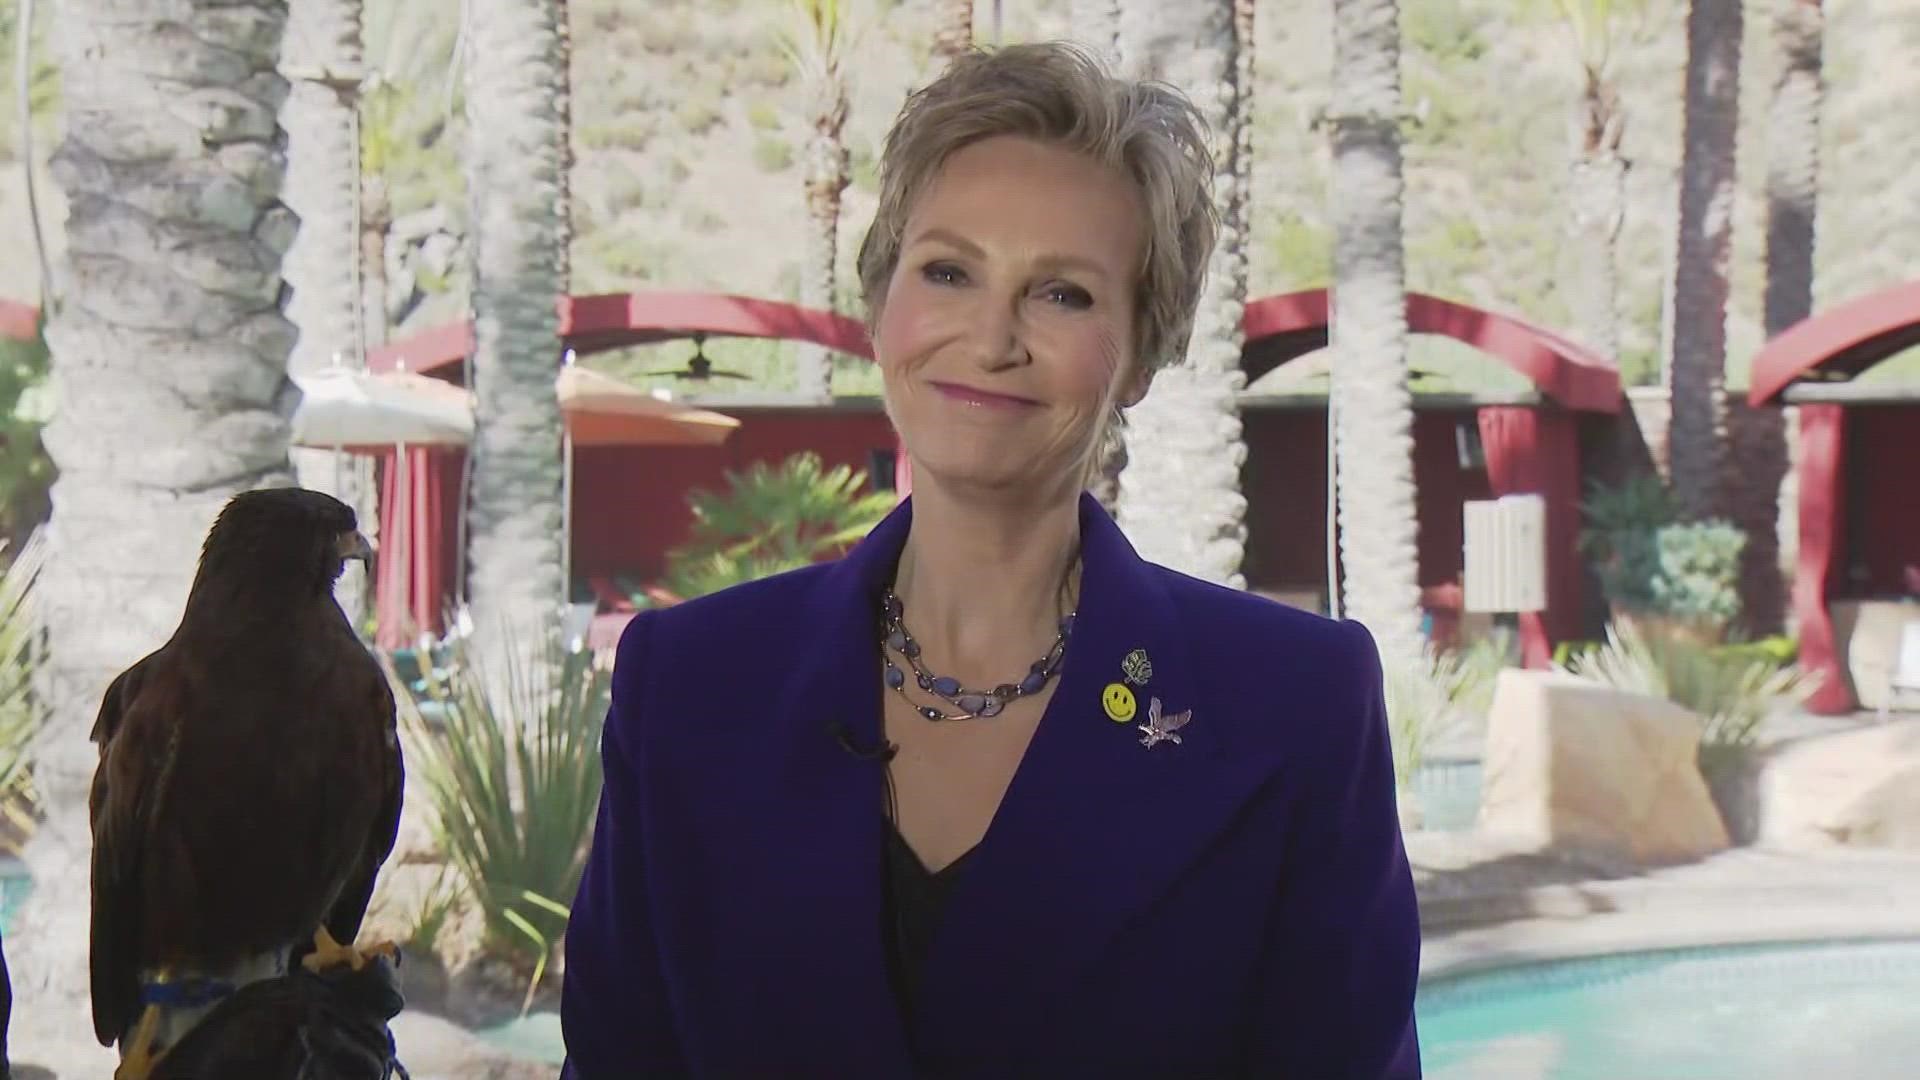 Official inauguration of Jane Lynch as the new mayor of Funner, CA at Harrah’s Resort Southern California.